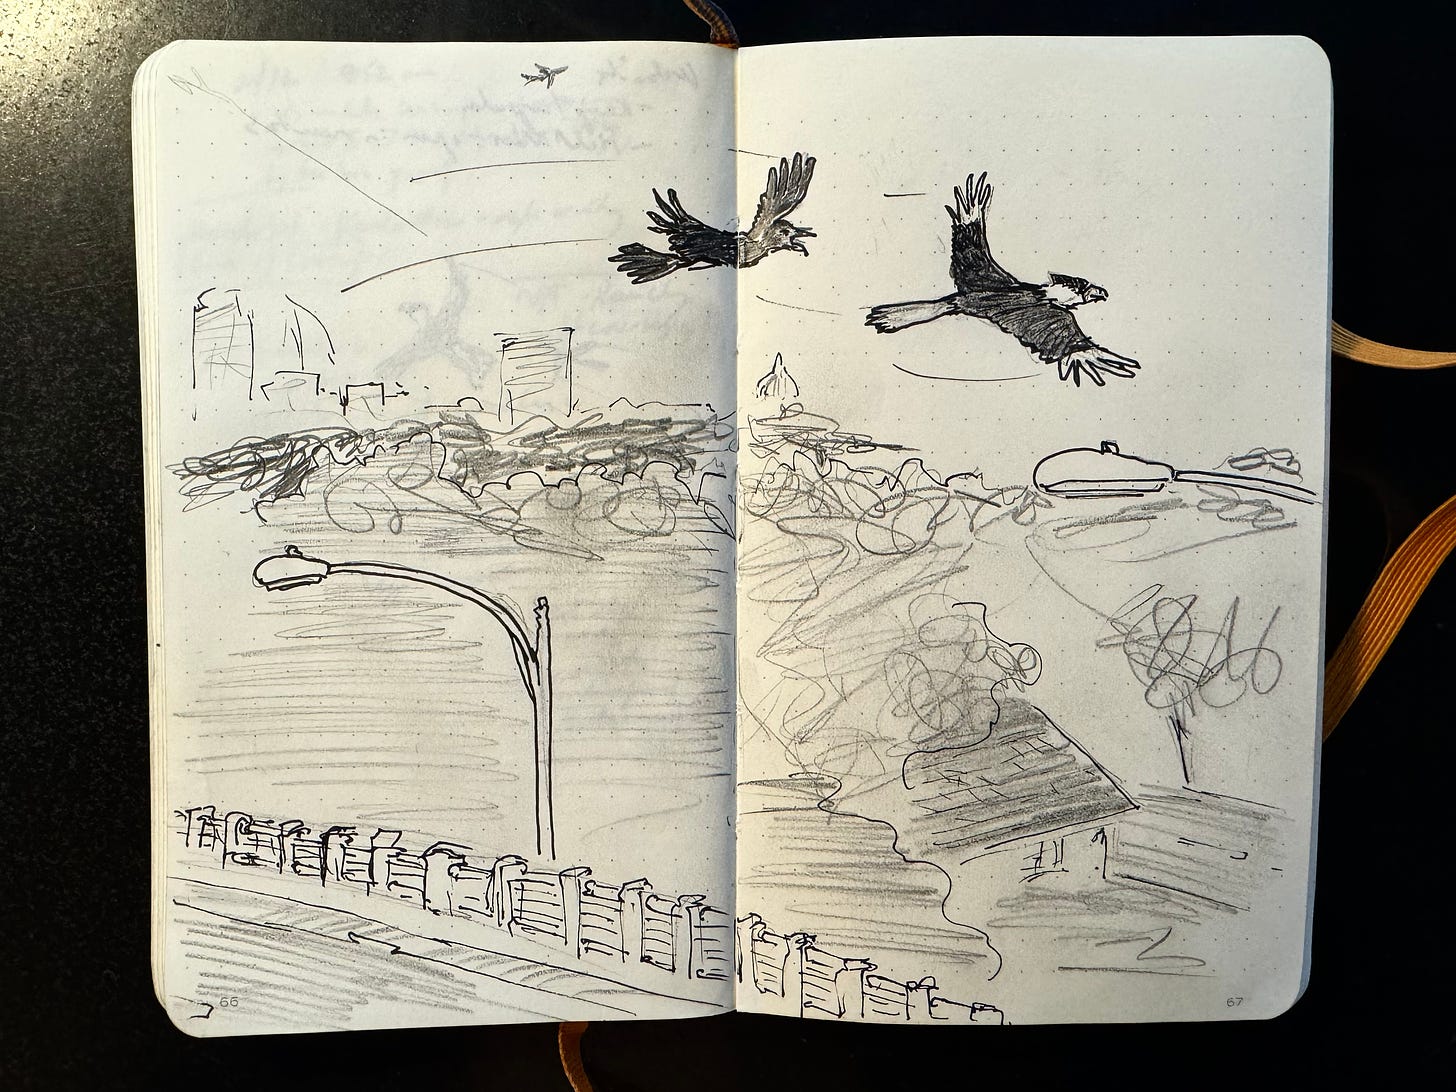 Author's sketch of a grackle chasing a caracara in flight over East Austin